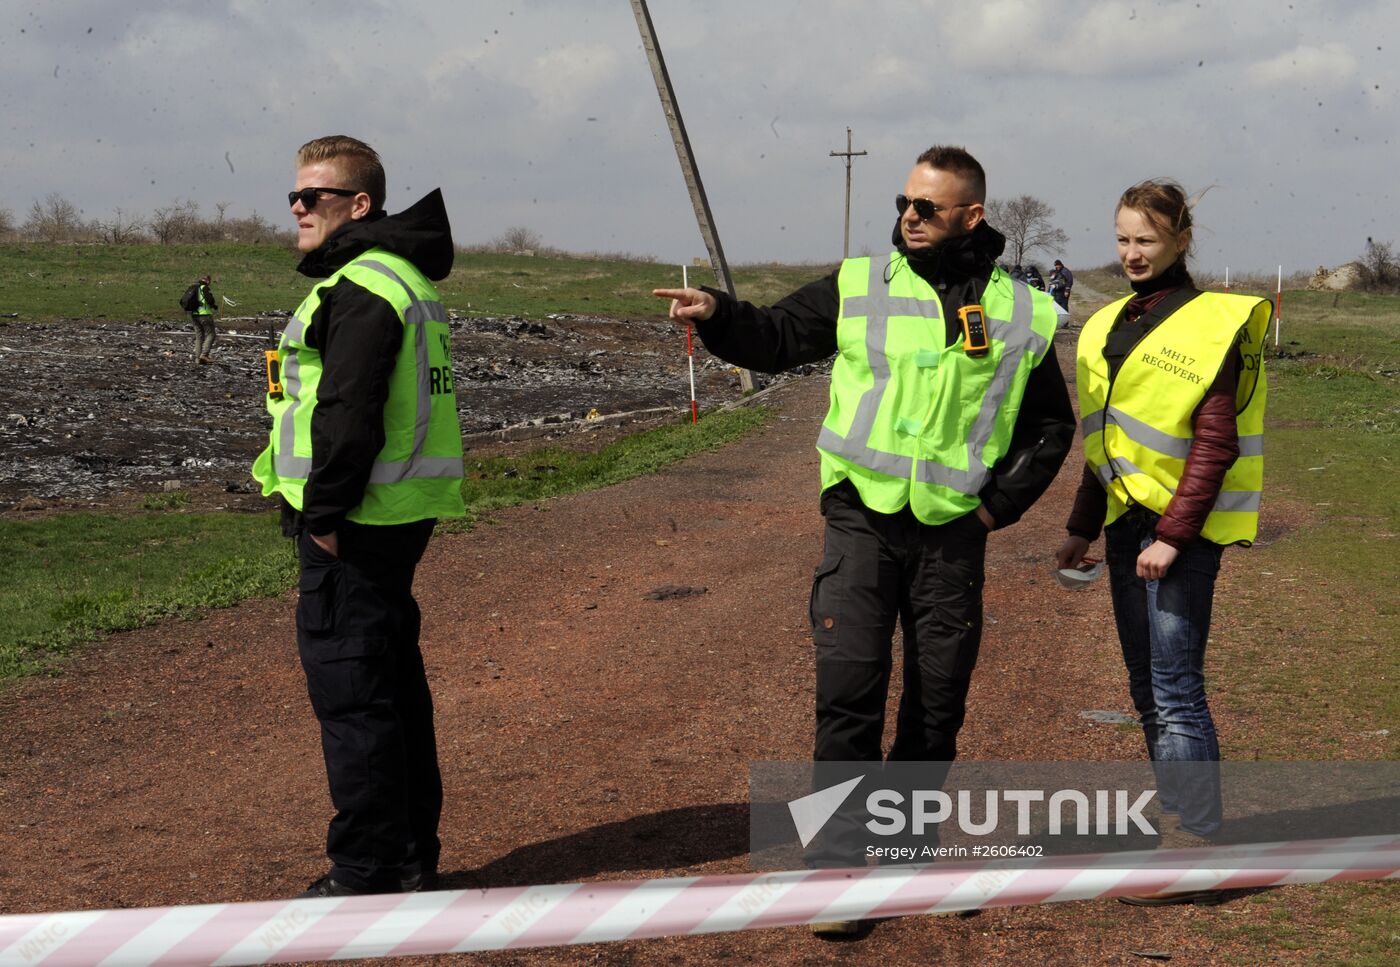 Dutch and Malaysian experts visit site of Malaysia Airlines flight MH17 plane crash